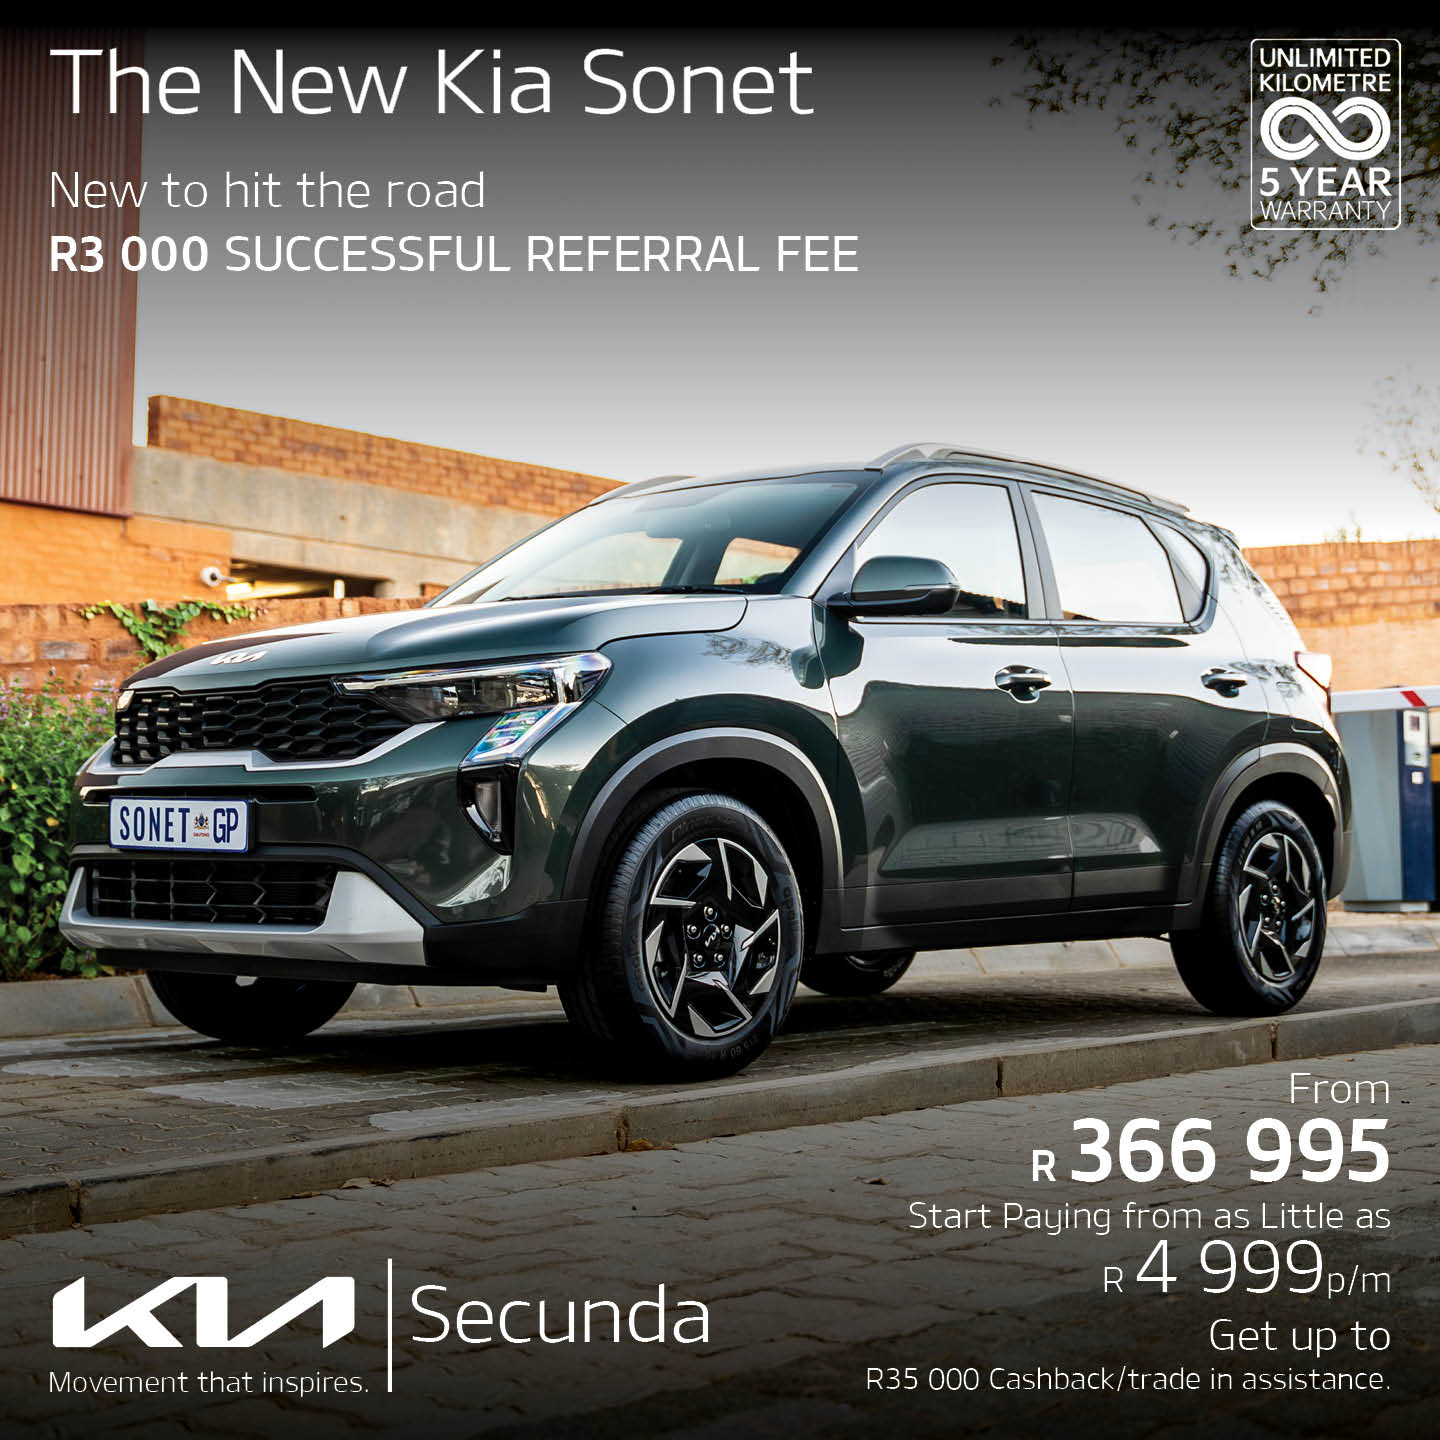 New to hit the road – The New KIA Sonet image from 